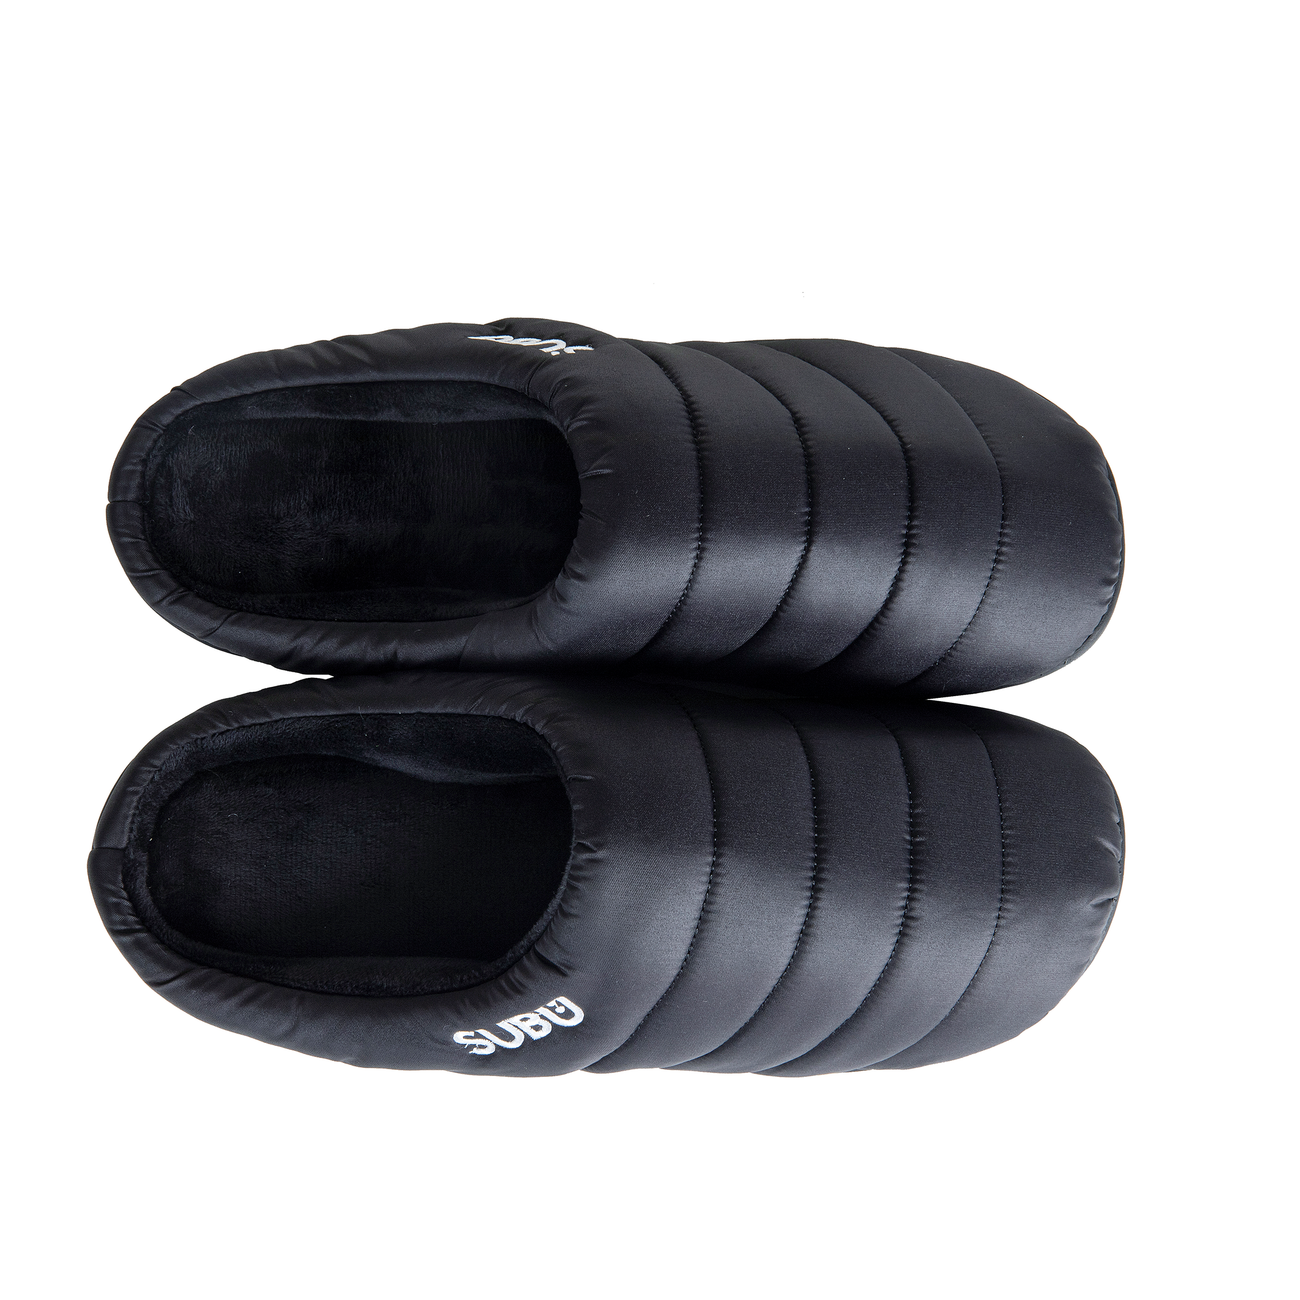 AMEICO - Official US Distributor of SUBU - Fall & Winter Slippers - Black